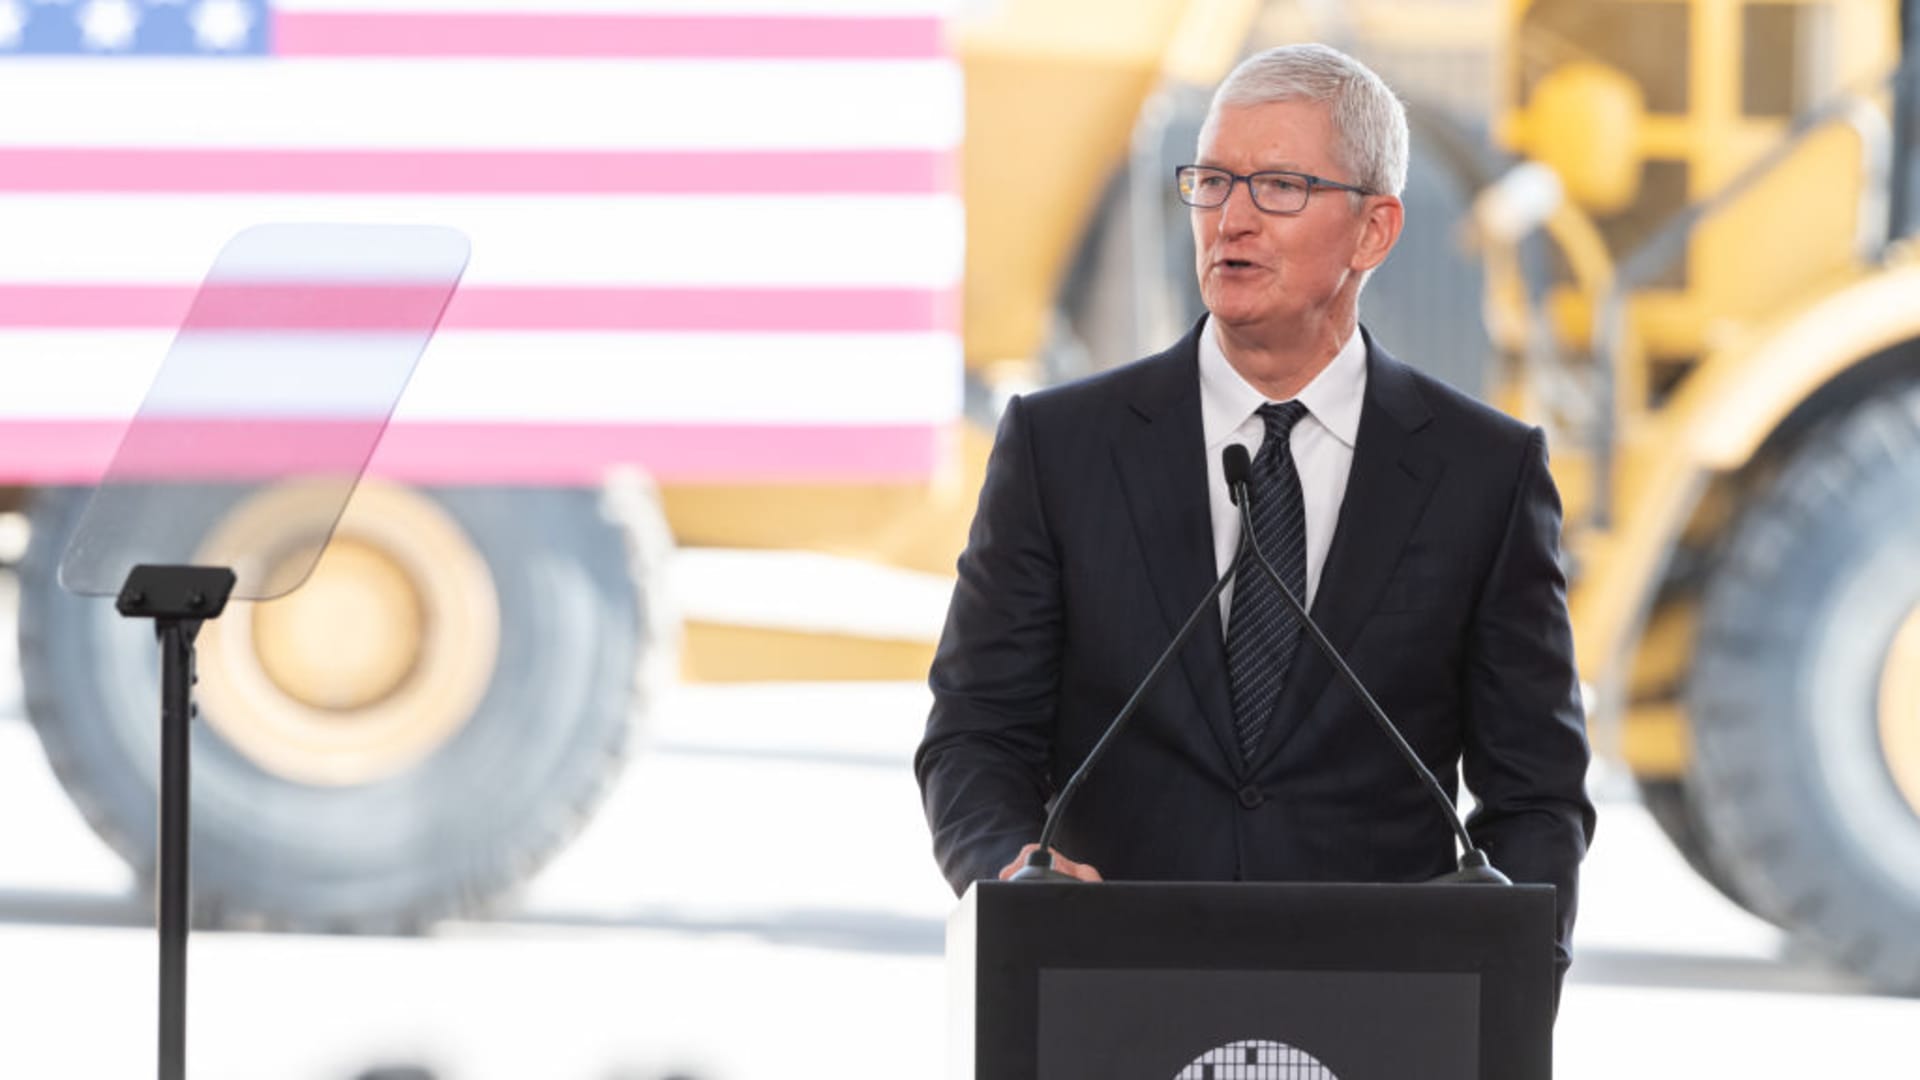 Apple CEO Tim Cook meets with China commerce minister on supply chain